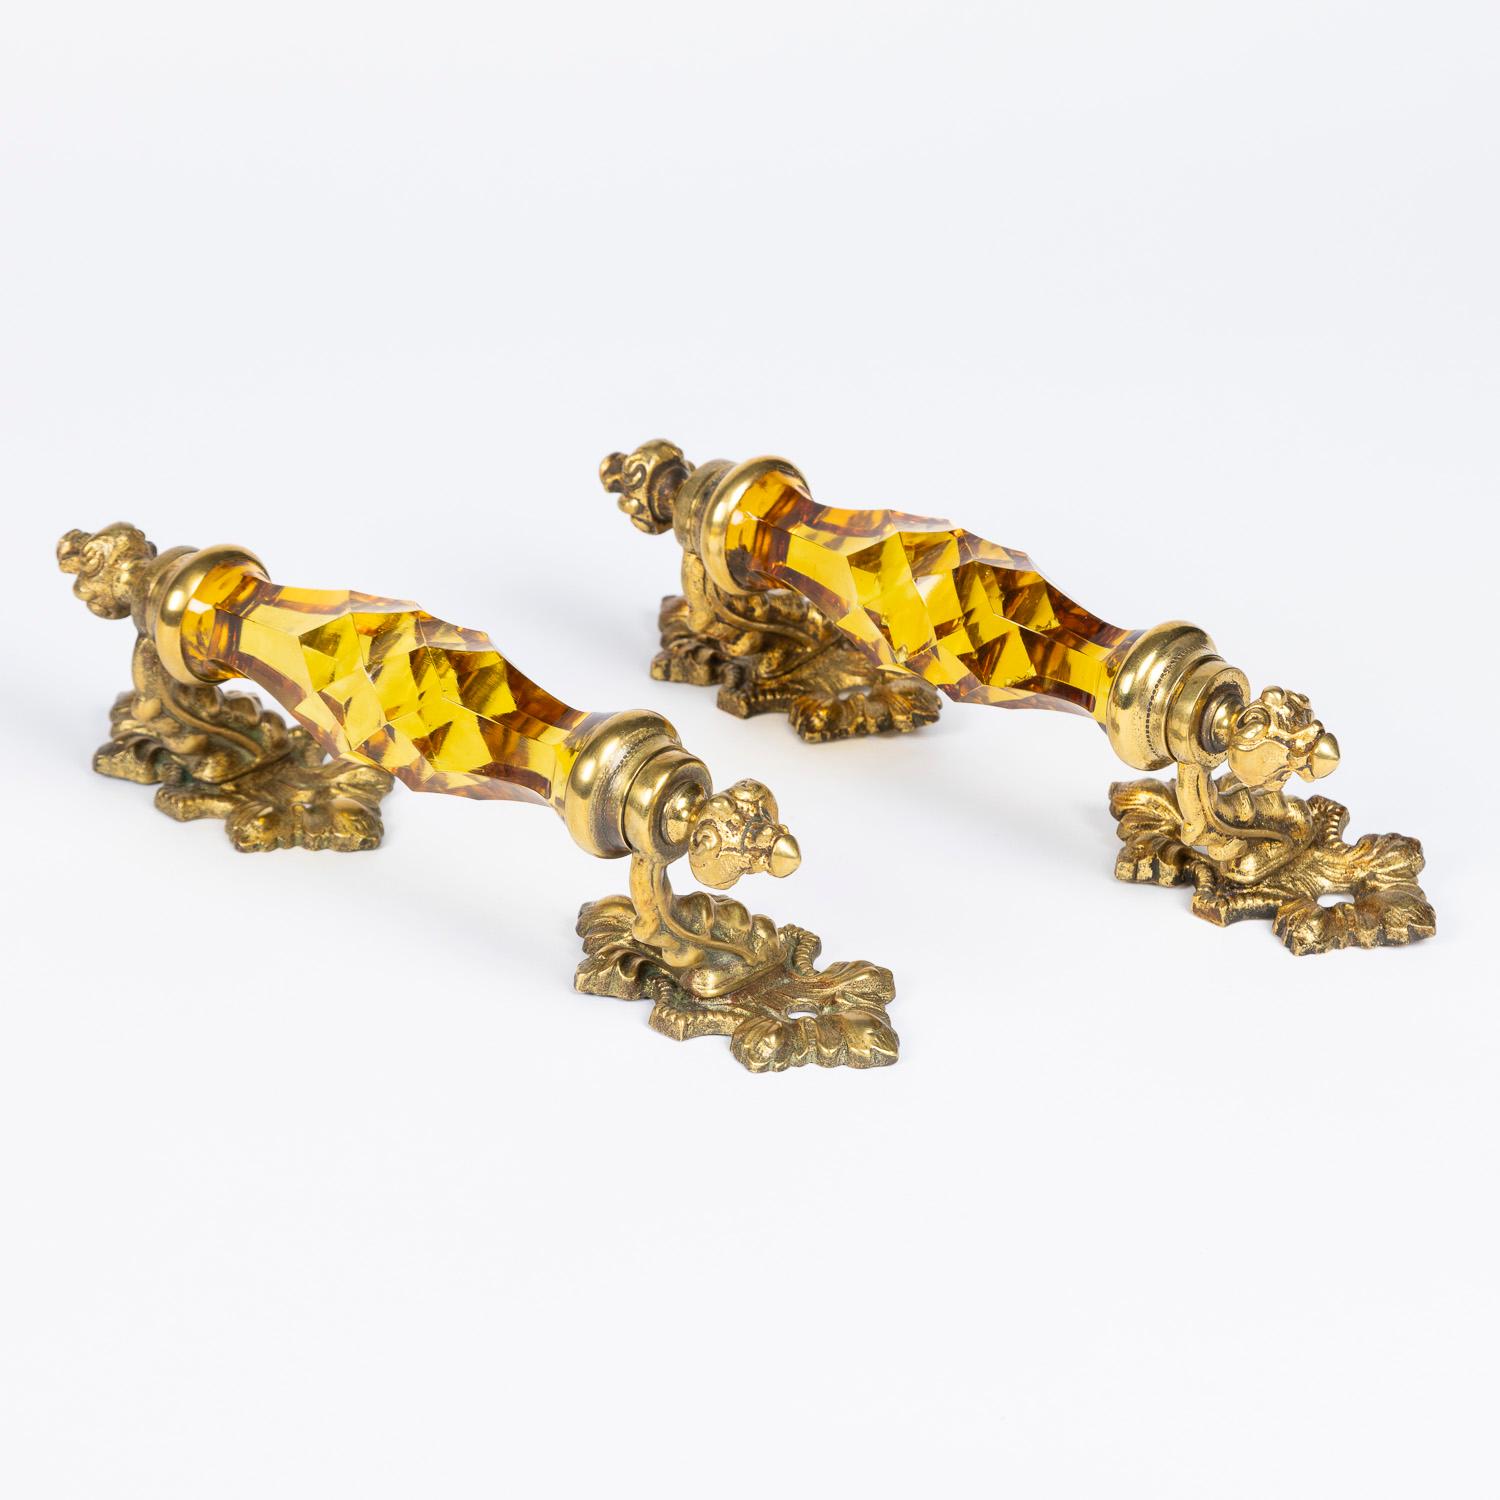 A pair of gilt brass door handles with amber coloured cut glass by James Cartland & Son of Birmingham, circa 1890.
 

See: James Cartland & Son catalogue, 1886, page 291.